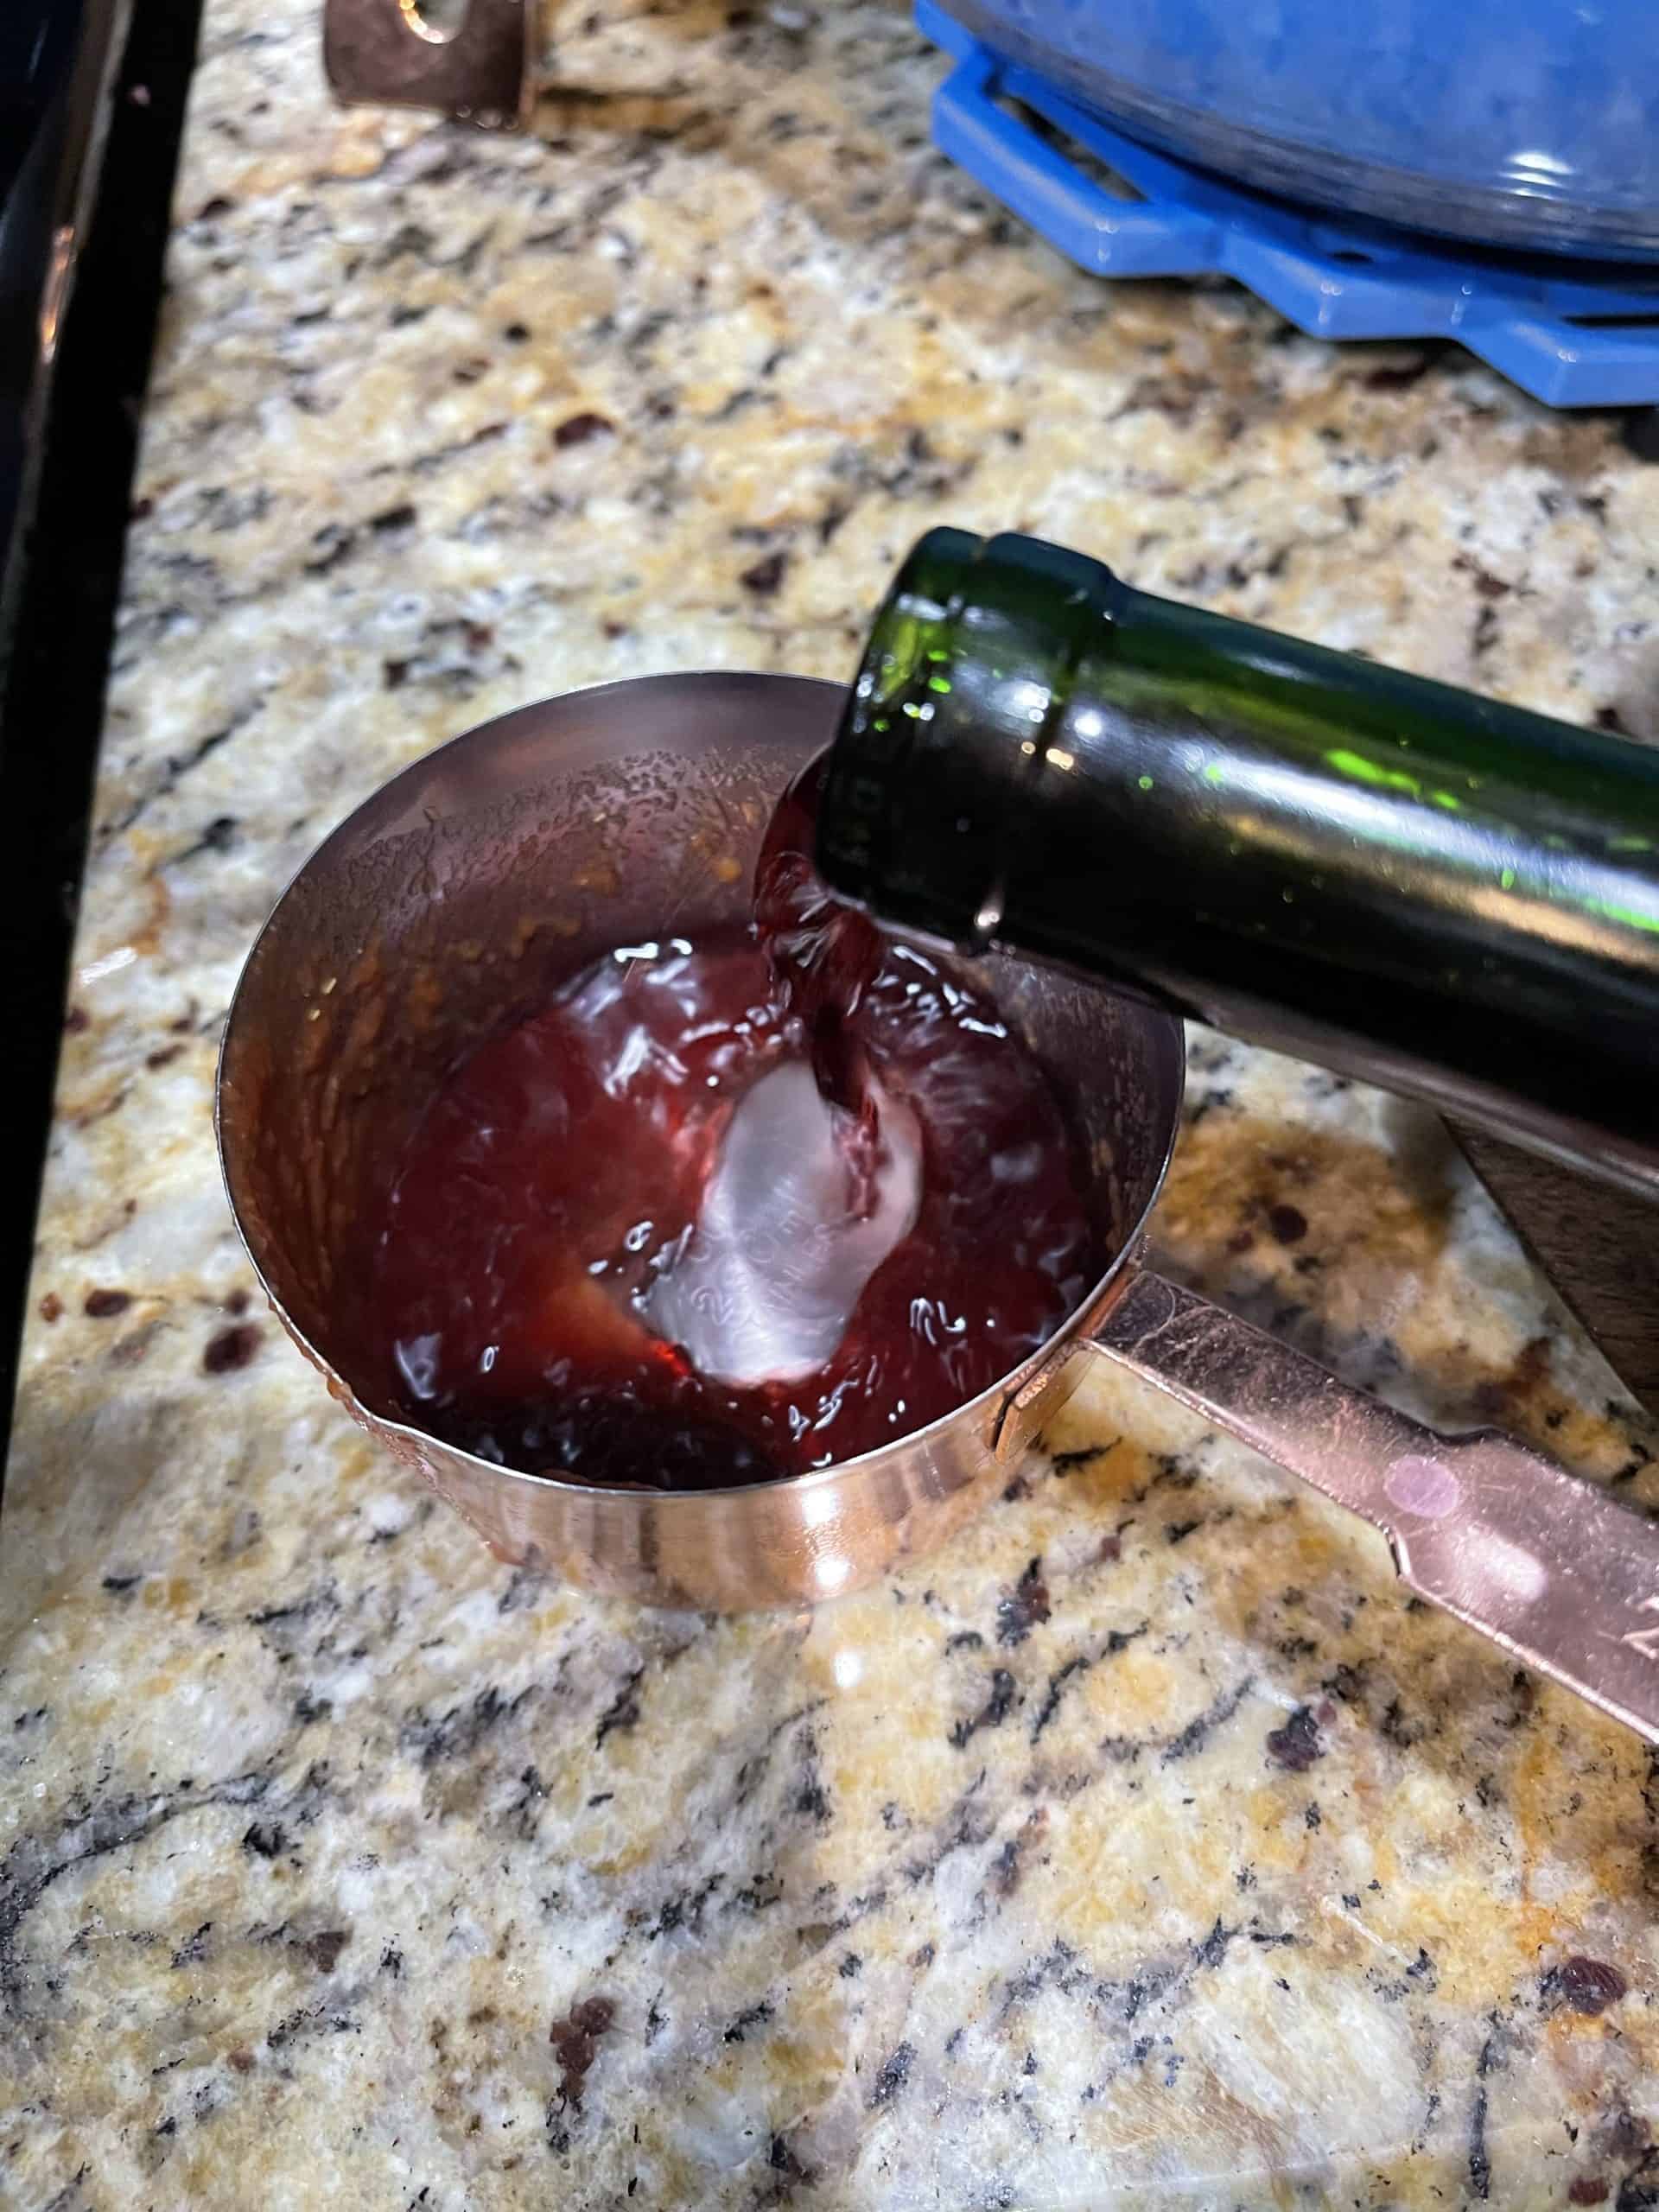 Red wine poured into measuring cup